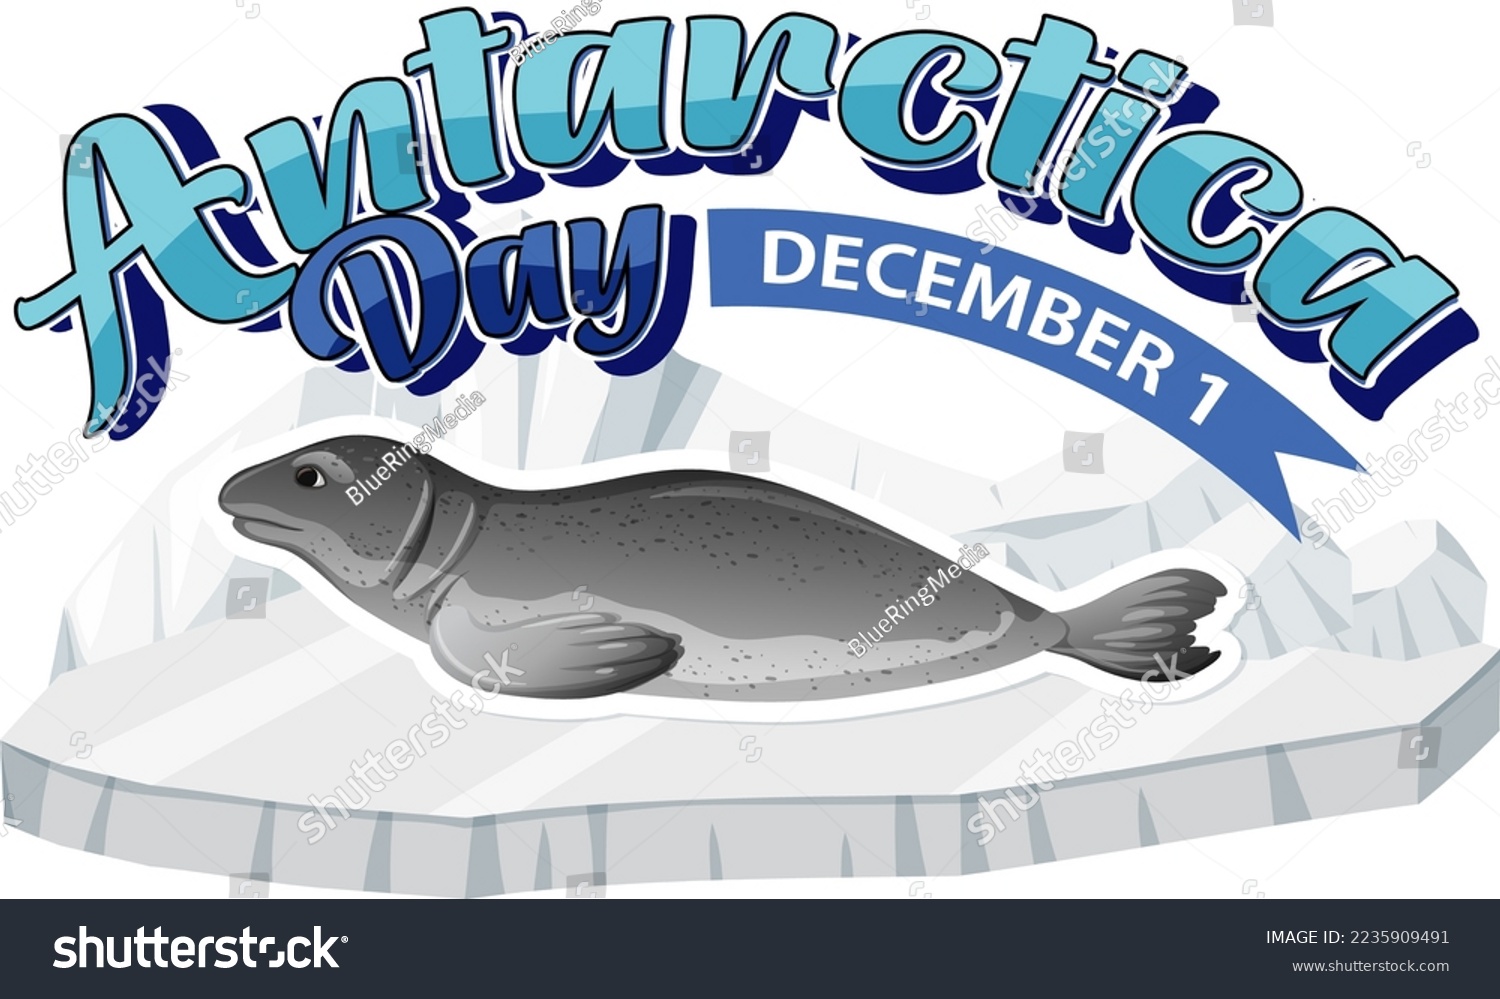 SVG of Antarctica day text with dugong illustration svg